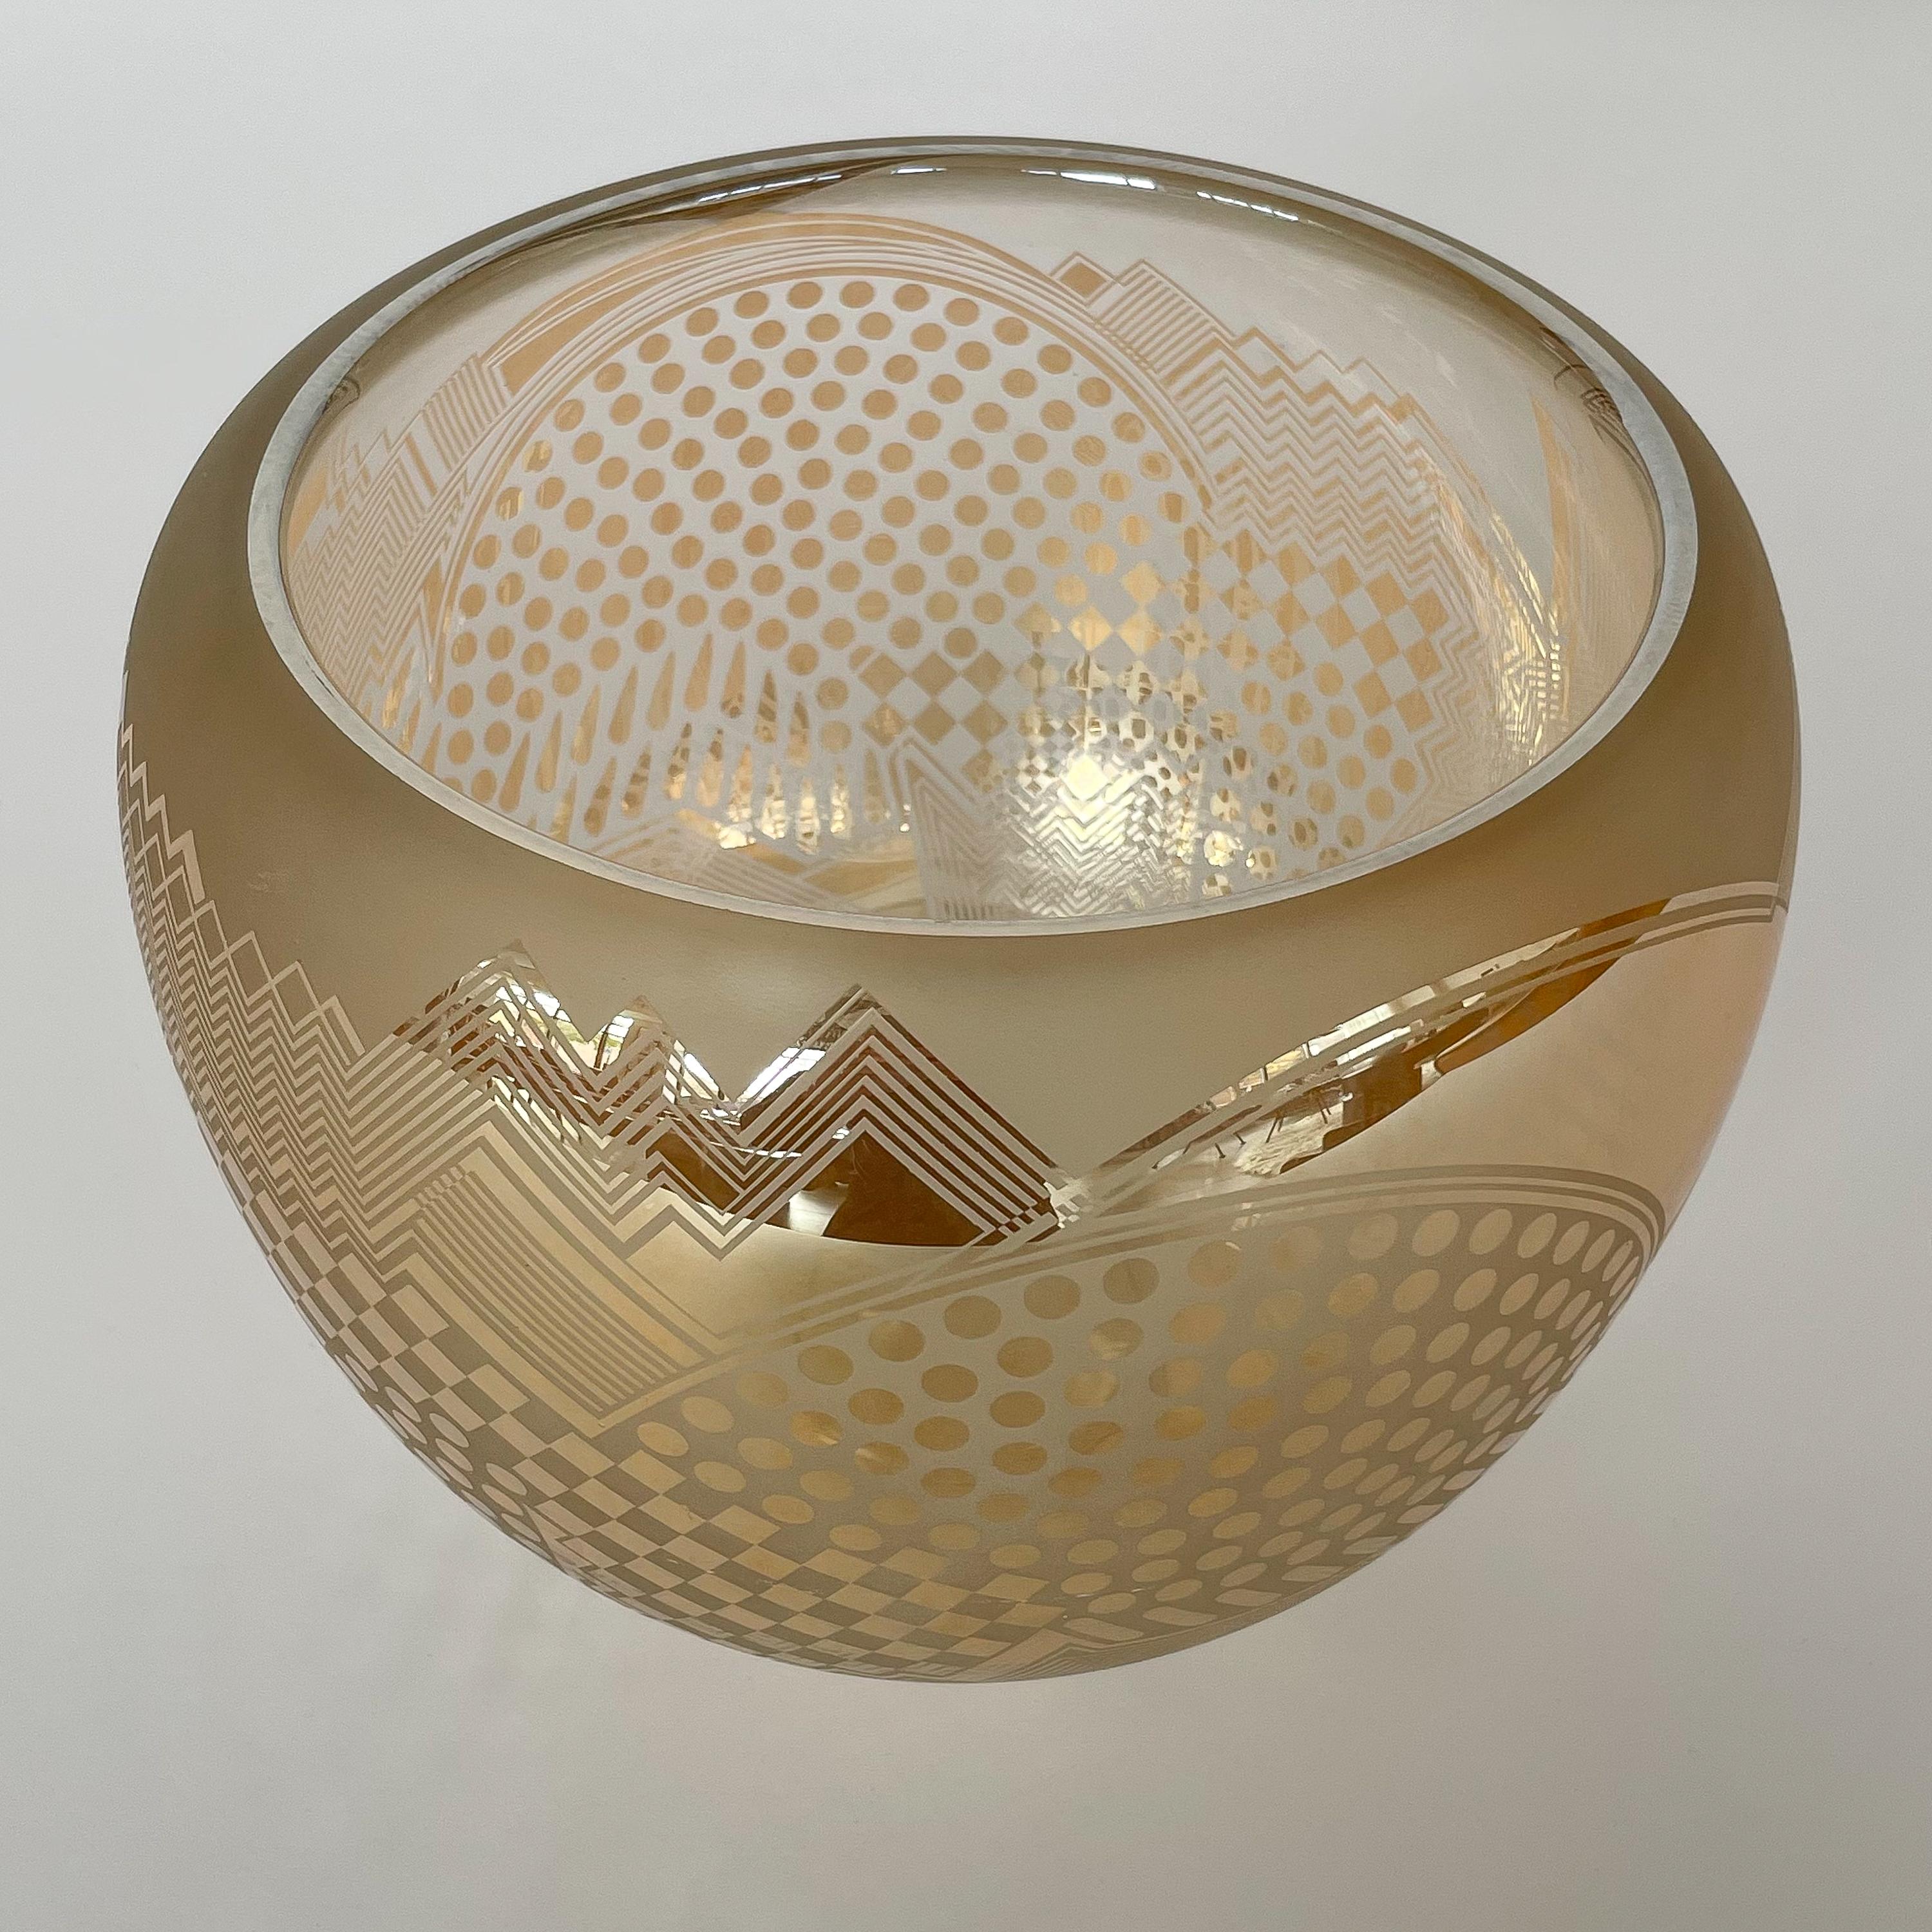 Art Glass Michelle Schoen / Bob Toensing Frosted and Gold Mirrored Glass Bowl